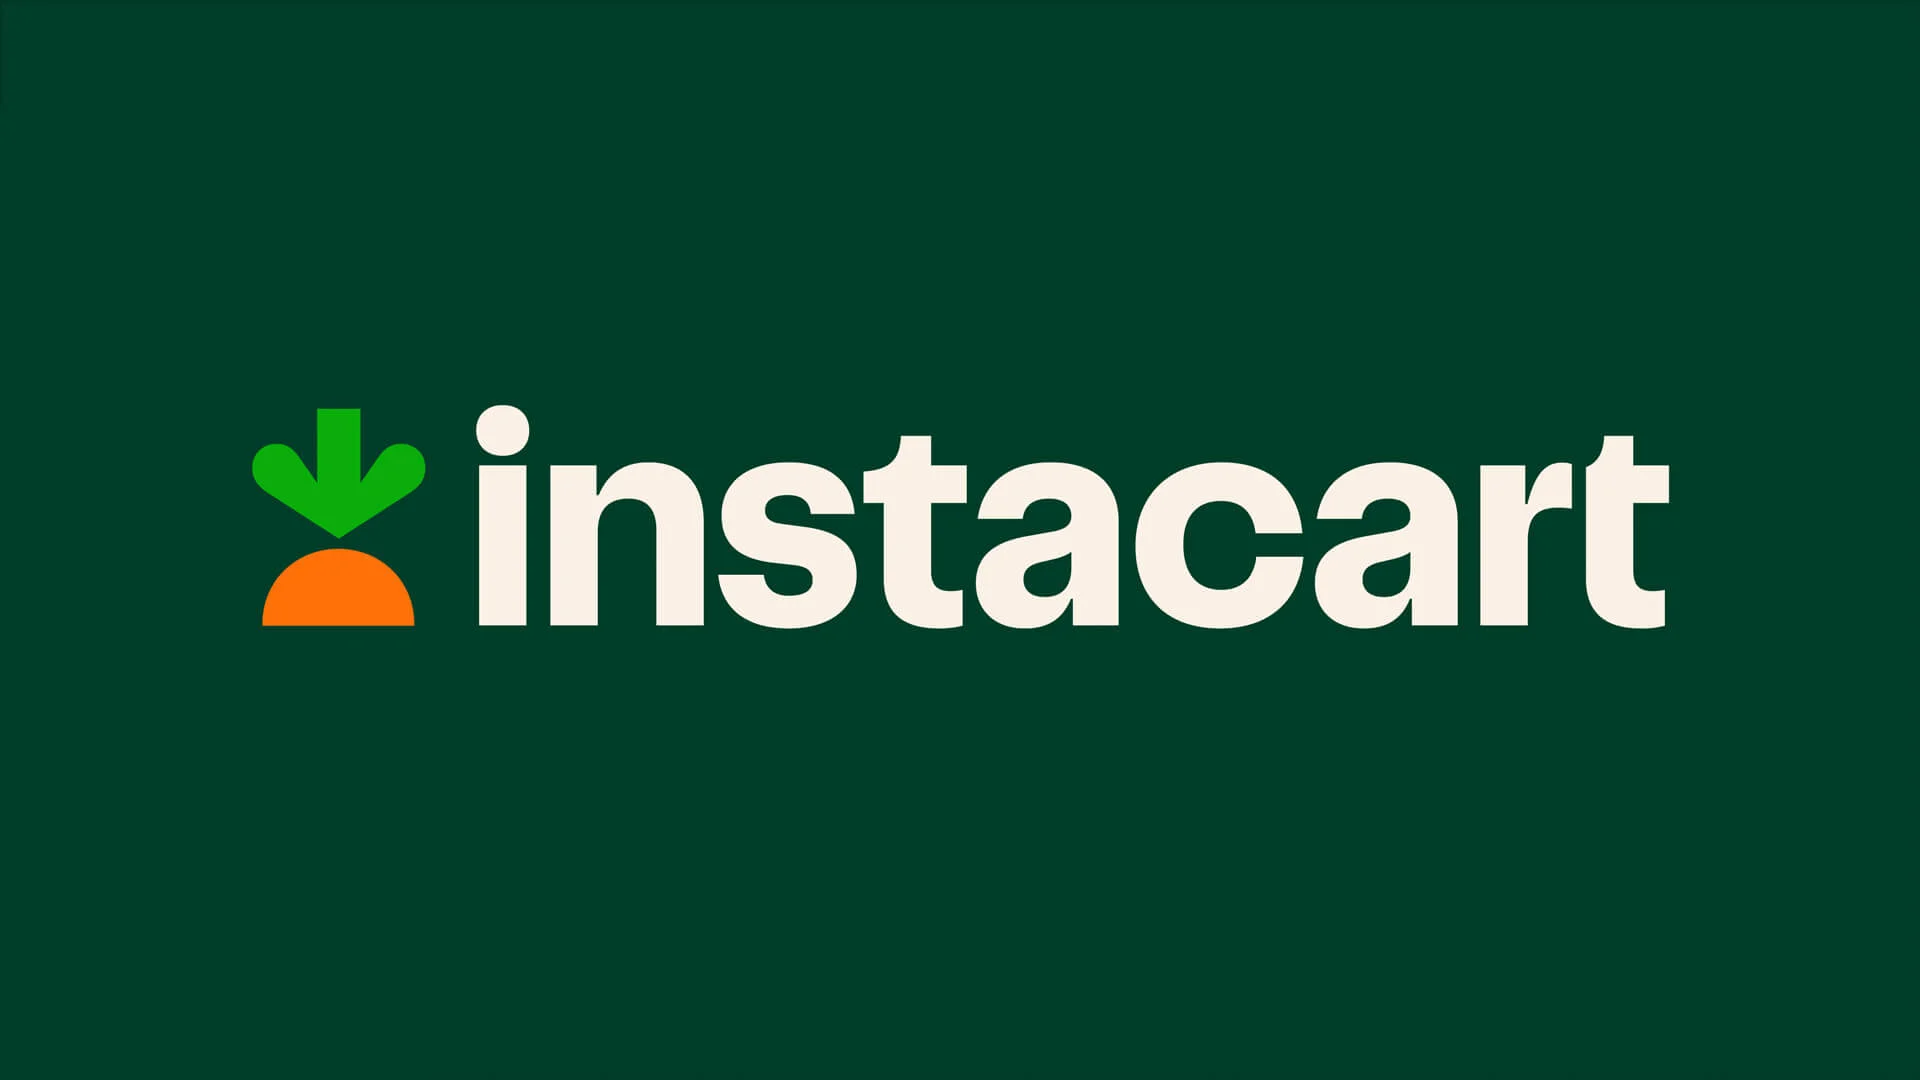 Instacart is Now Making Shopping Even Easier By Using AI